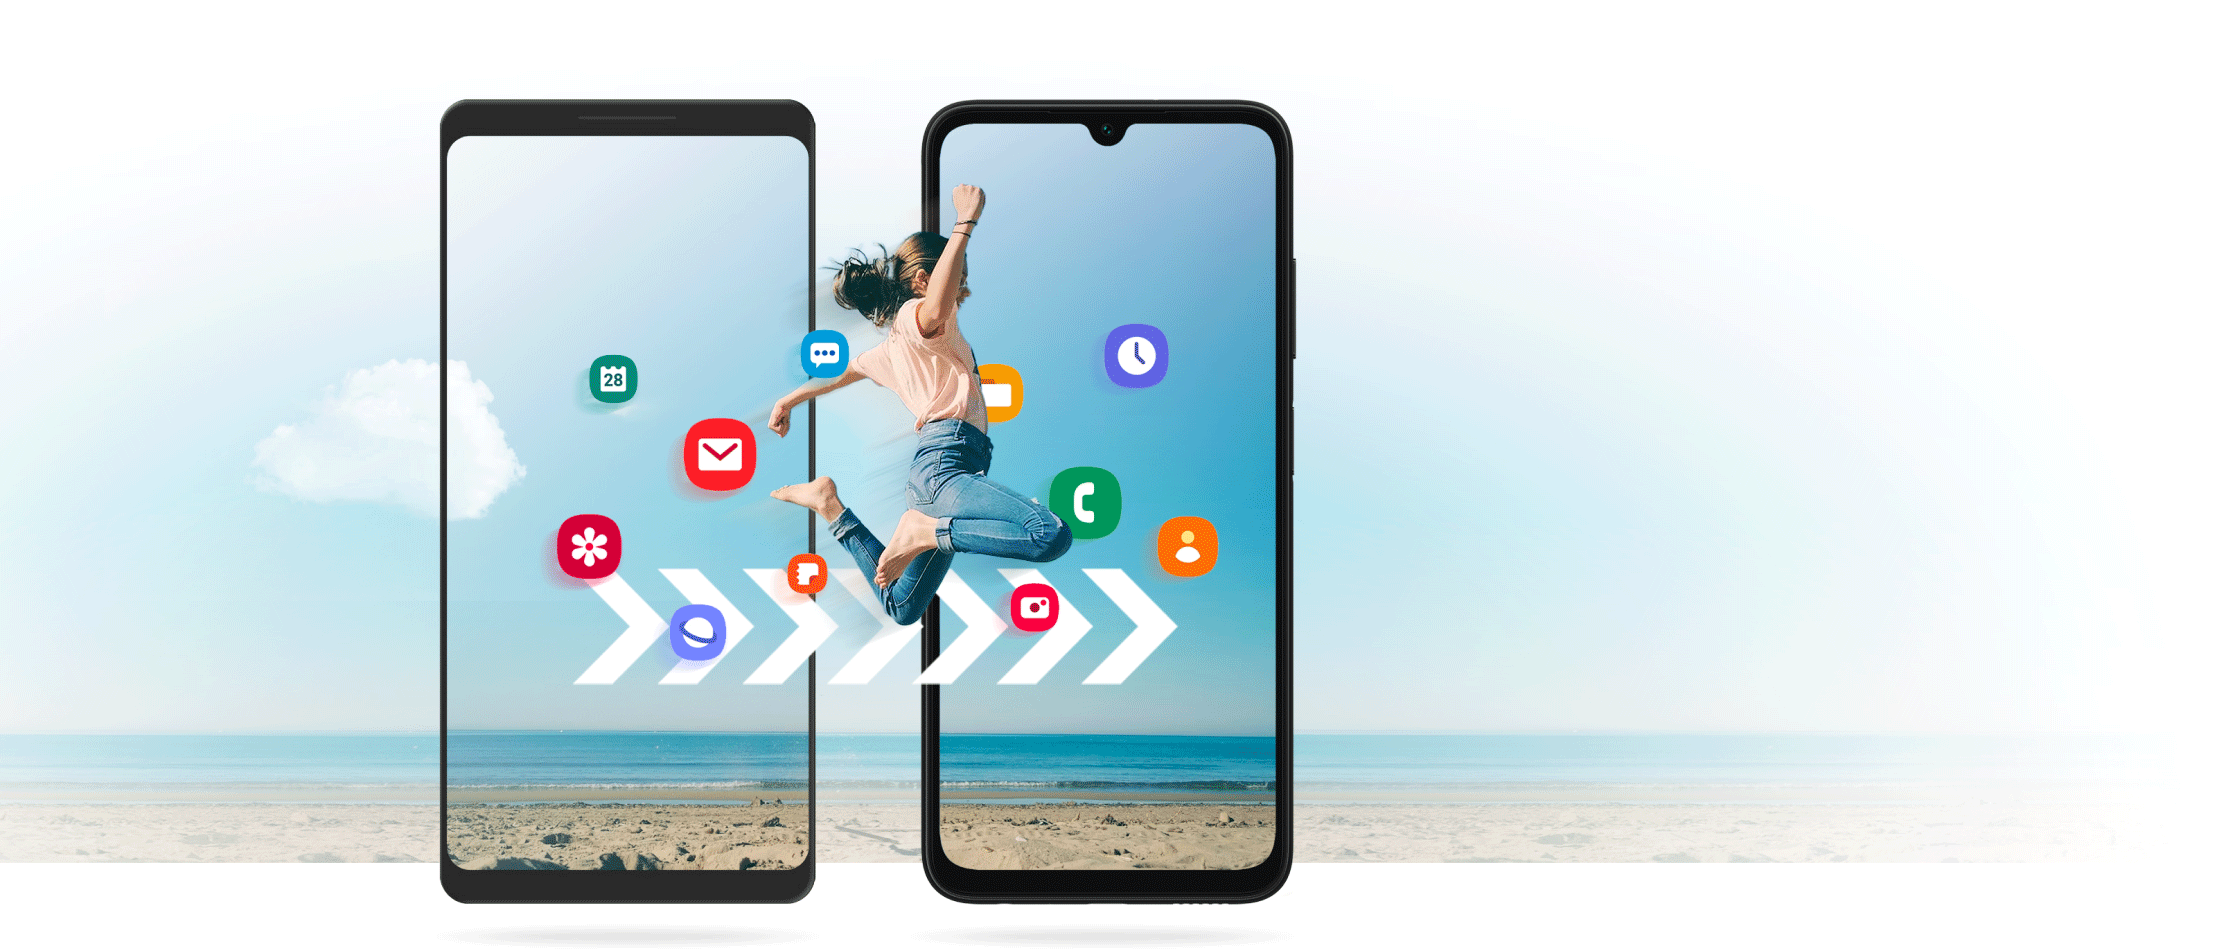 Two mobile phones with illustrated icons and a woman jumping from screen to screen to illustrate moving your contents from one device to another.